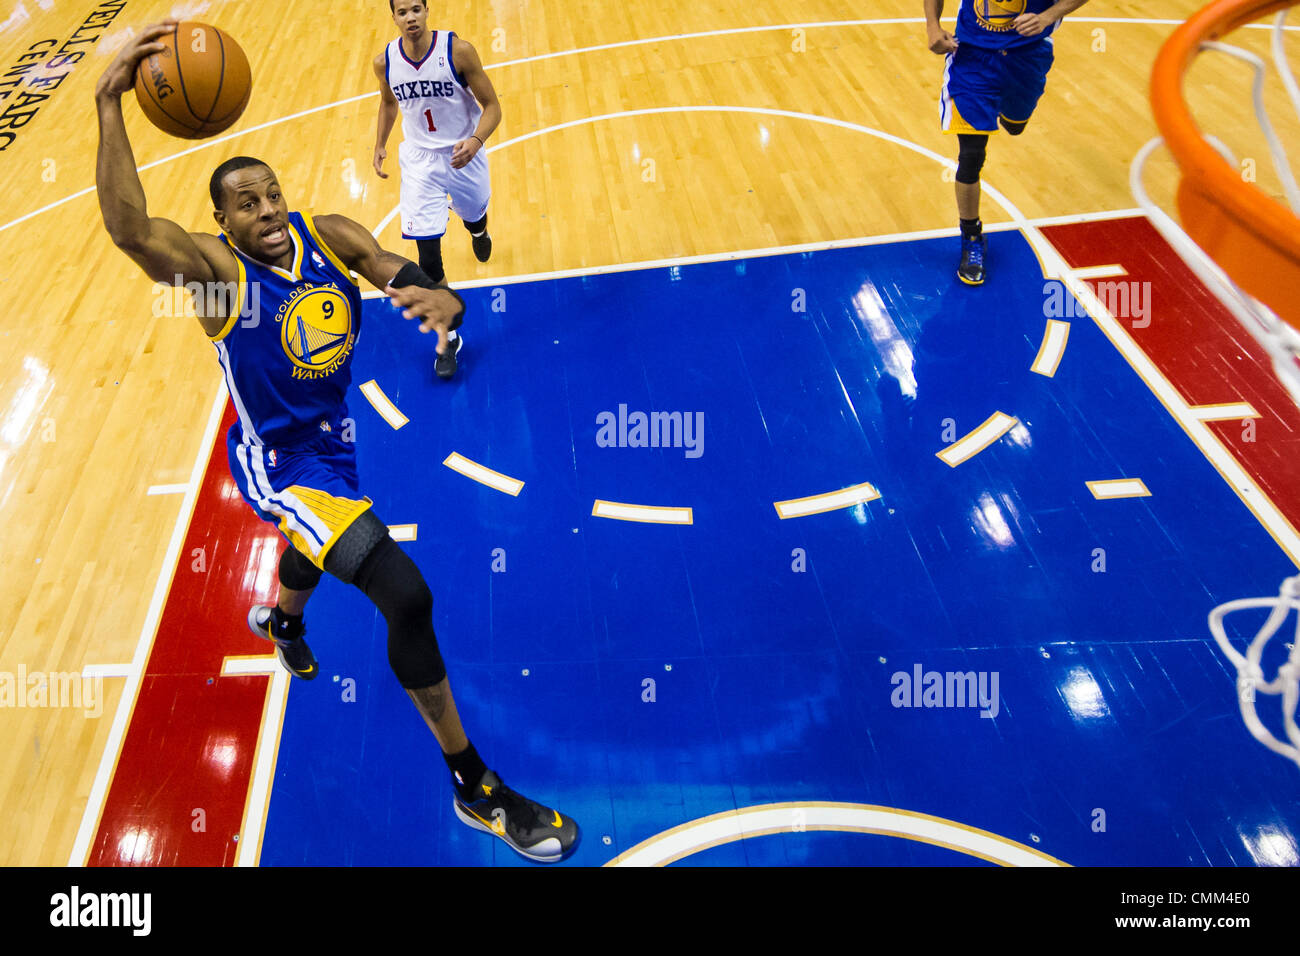 Philadelphia, Pennsylvania, USA. 4th Nov, 2013. Golden State Warriors shooting guard Andre Iguodala (9) goes for the dunk during the NBA game between the Golden State Warriors and the Philadelphia 76ers at the Wells Fargo Center in Philadelphia, Pennsylvania. The Warriors win 110-90. (Christopher Szagola/Cal Sport Media/Alamy Live News) Stock Photo